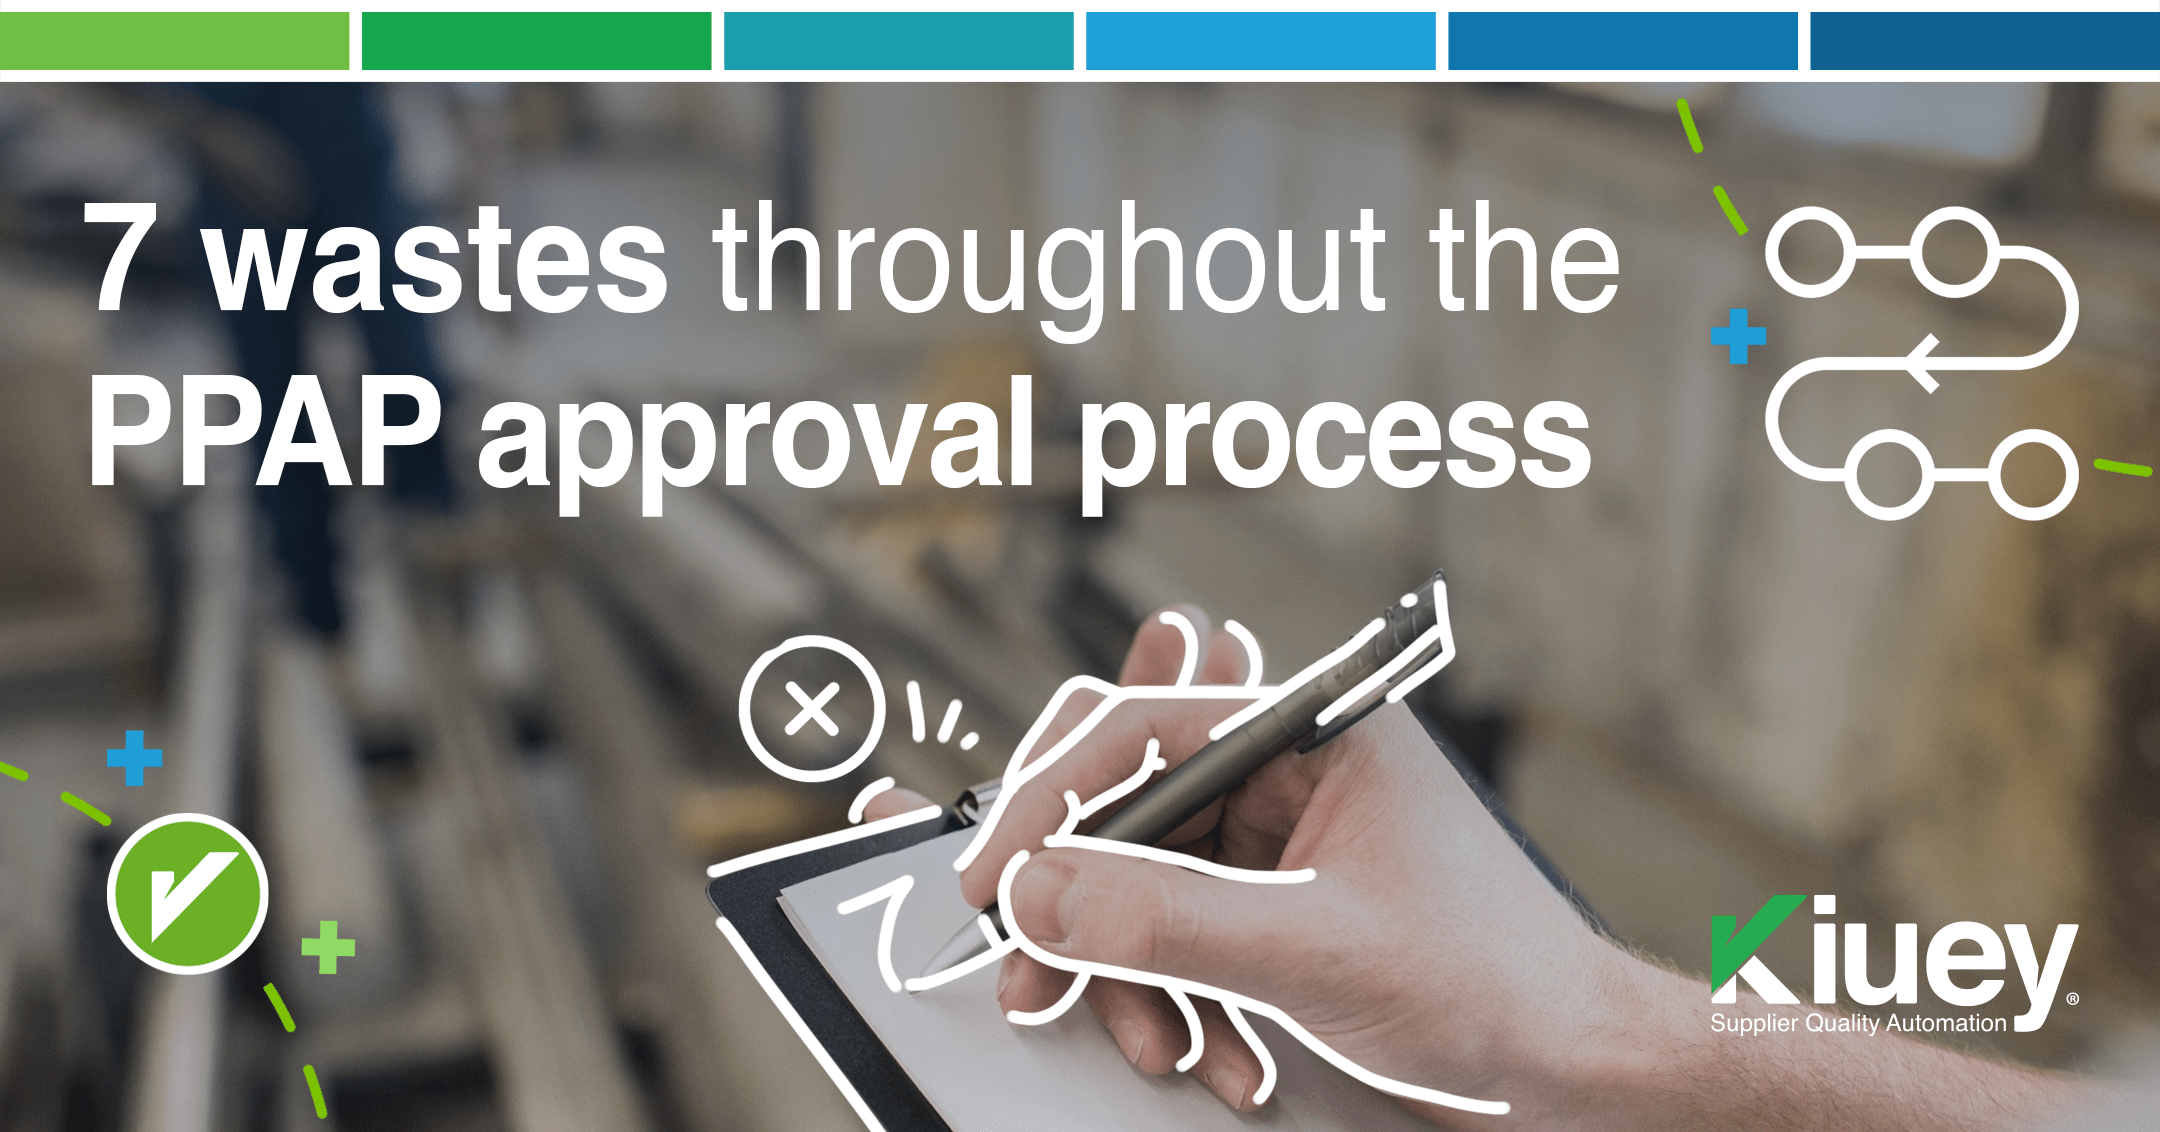 Identifying the seven wastes throughout the PPAP approval process